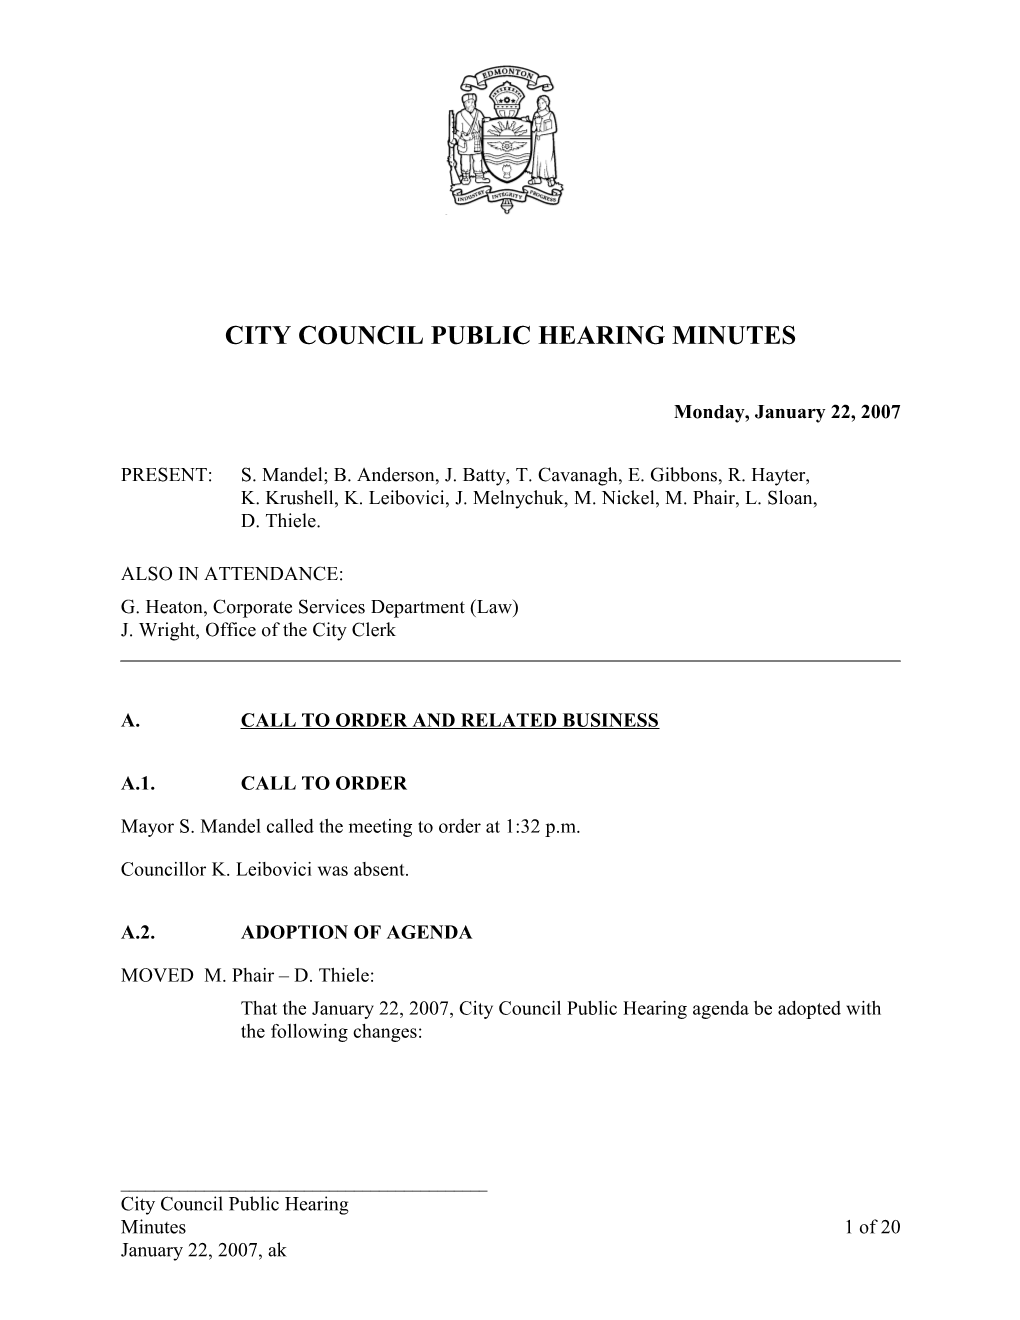 Minutes for City Council January 22, 2007 Meeting